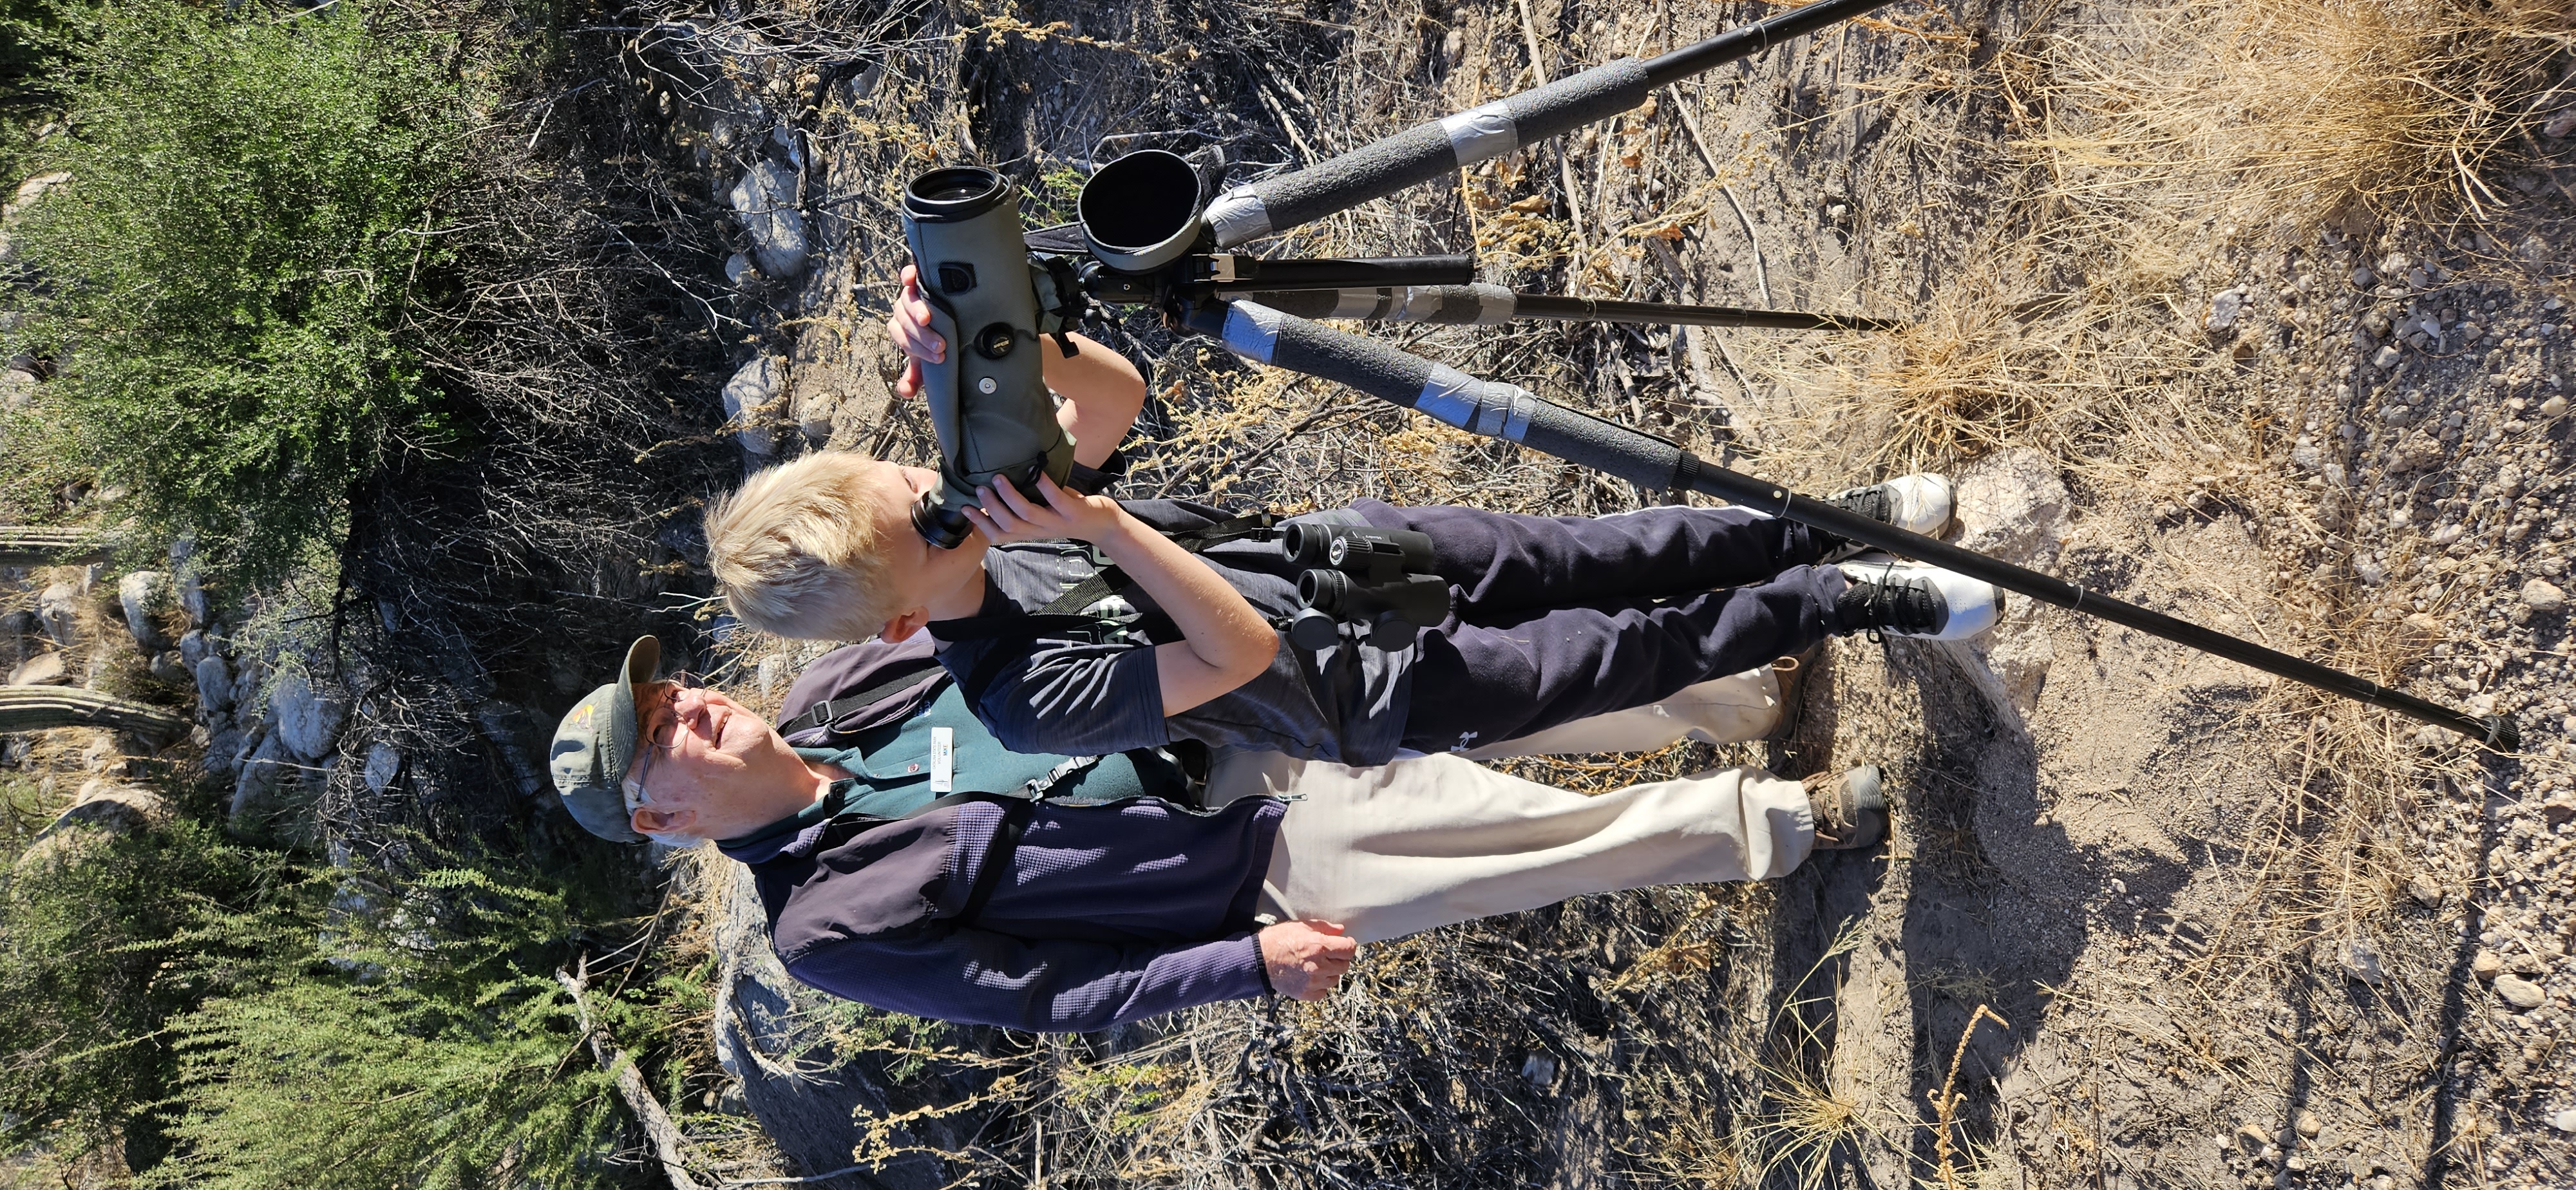 A volunteer and young person use mounted binoculars to find birds at Catalina State Park